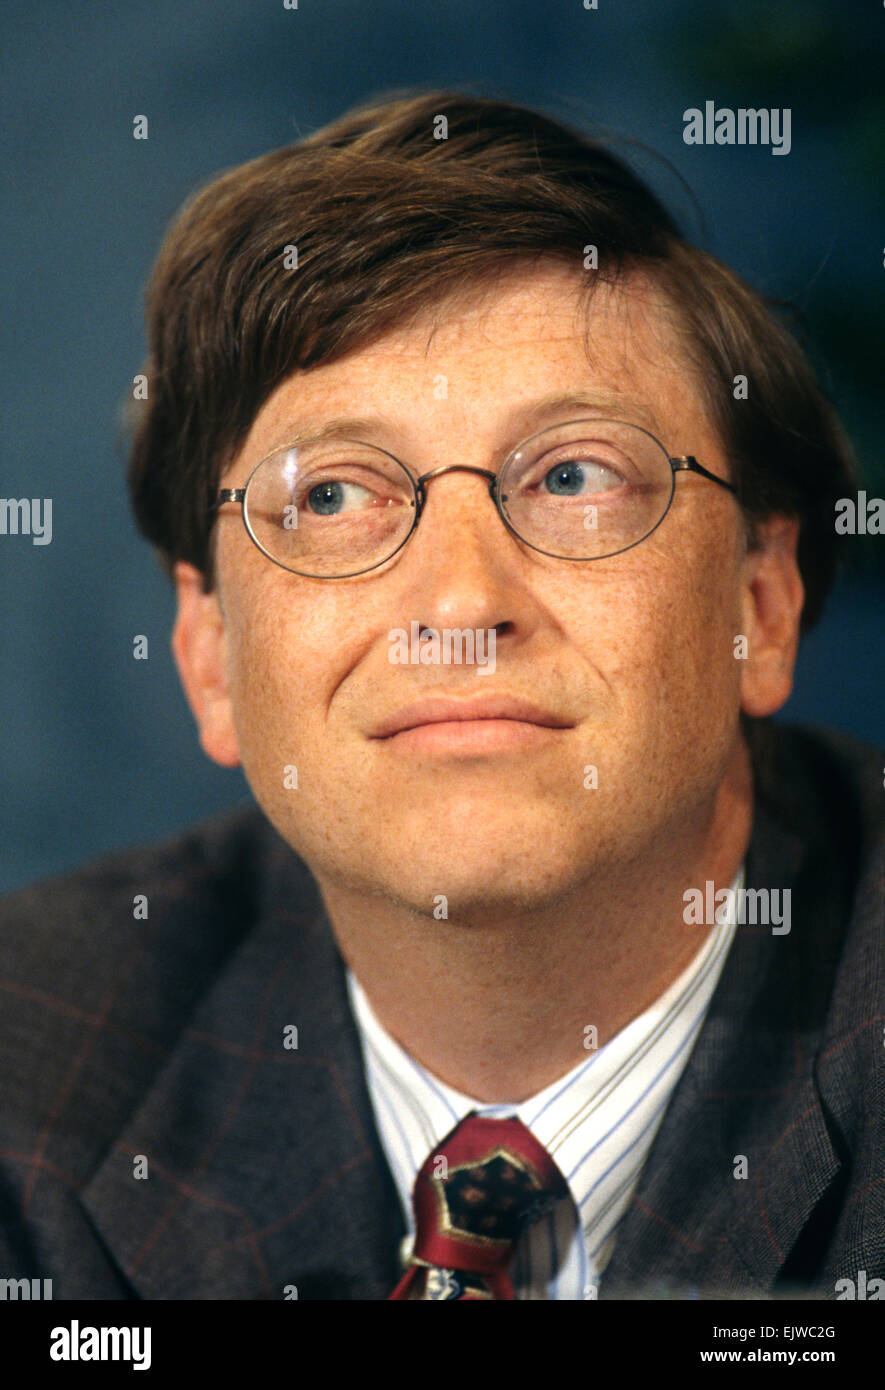 CEO of Microsoft Bill Gates during a technology event at the National Press Club June 4, 1997 in Washington, DC. Stock Photo